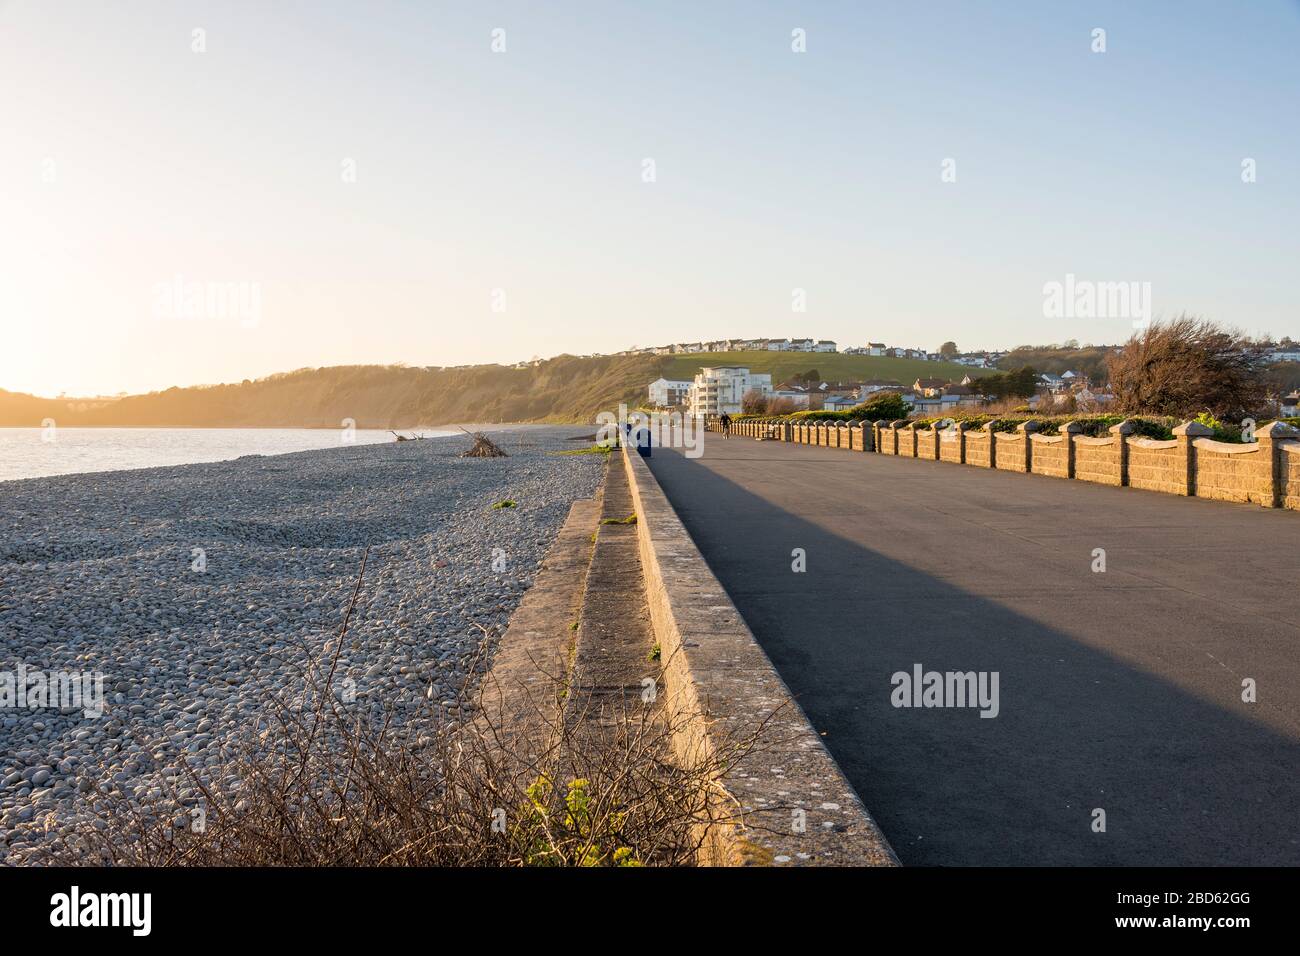 On a beautiful sunny evening the promenade at The Knap beside the pebble beach is virtually deserted during the Covid-19 crises. Stock Photo